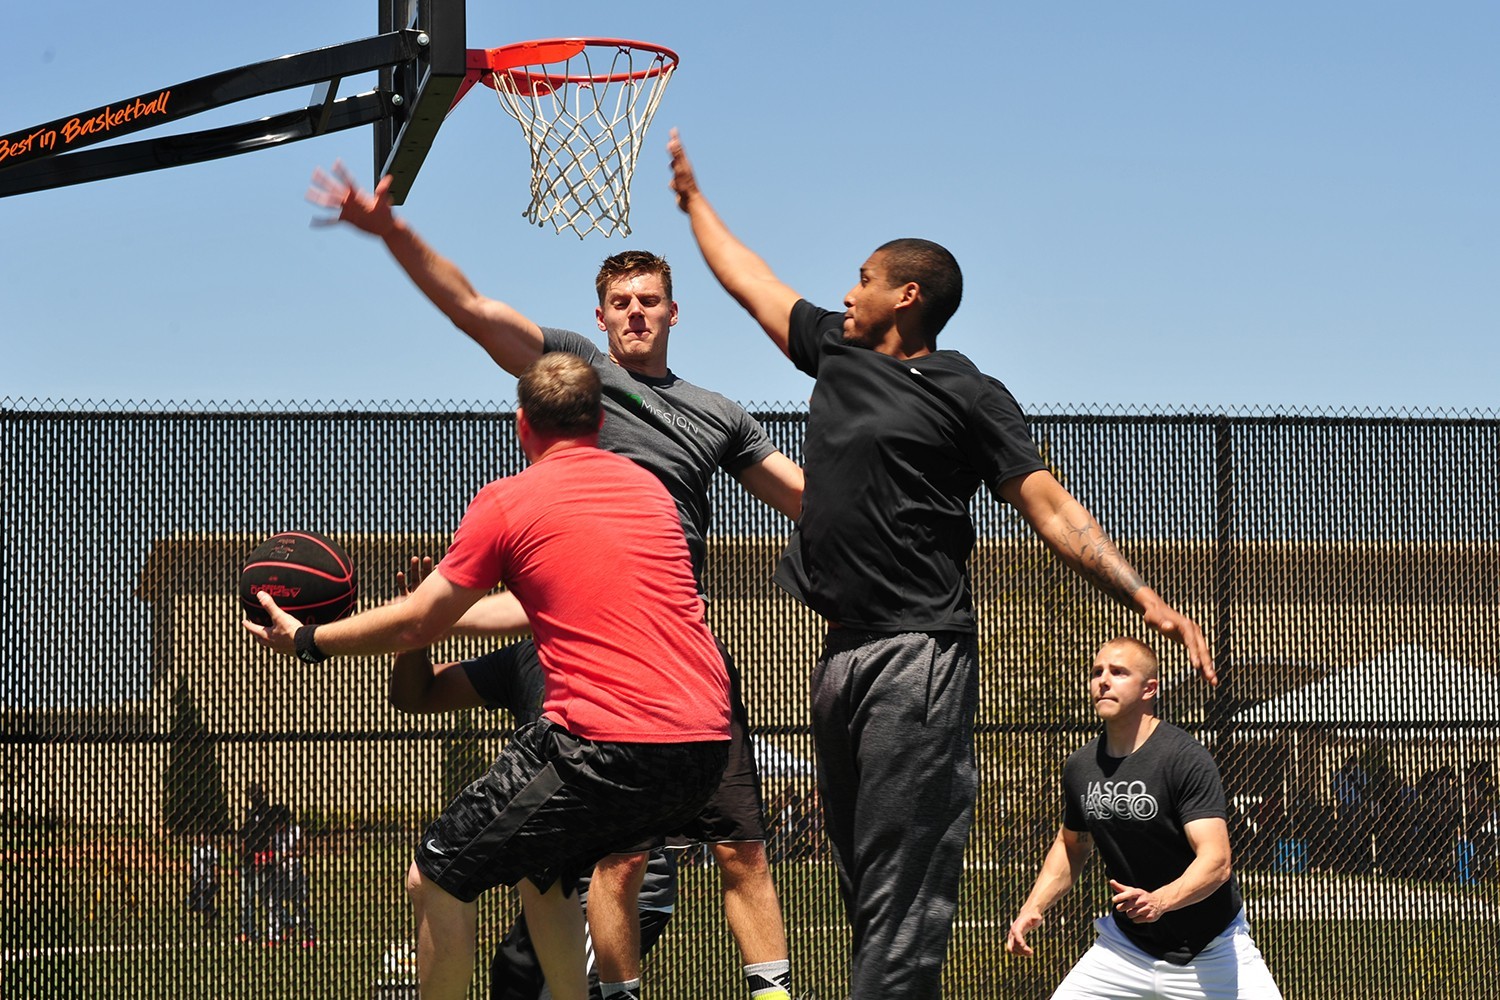 JascoSport encourages our team to participate in various recreational activities like basketball, pickleball and yoga.